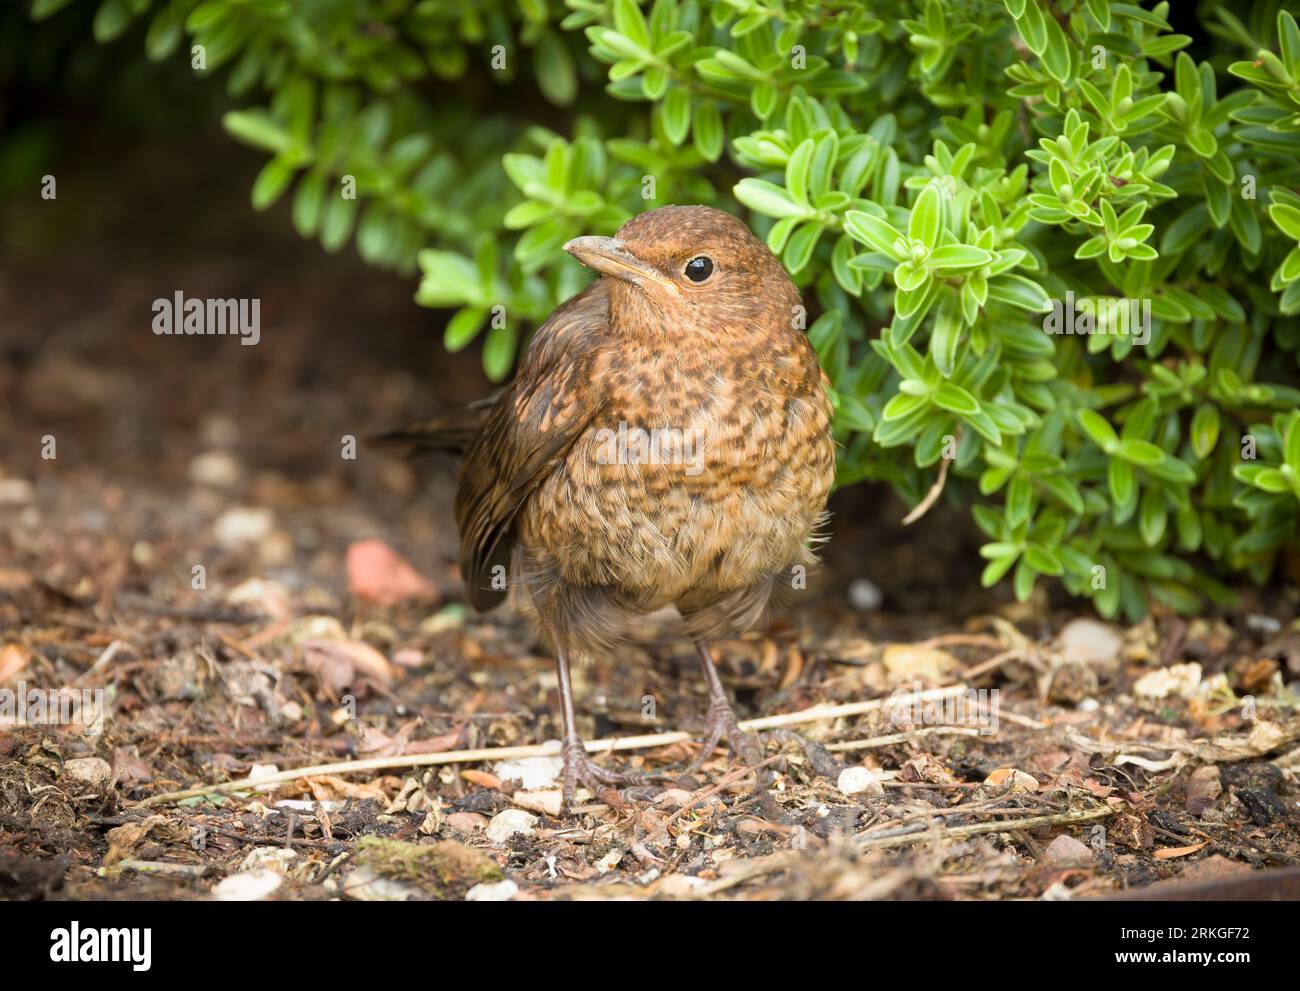 Juvenile common blackbird (Turdus merula) with mottled brown feathers on the ground in a flower bed in a UK garden Stock Photo